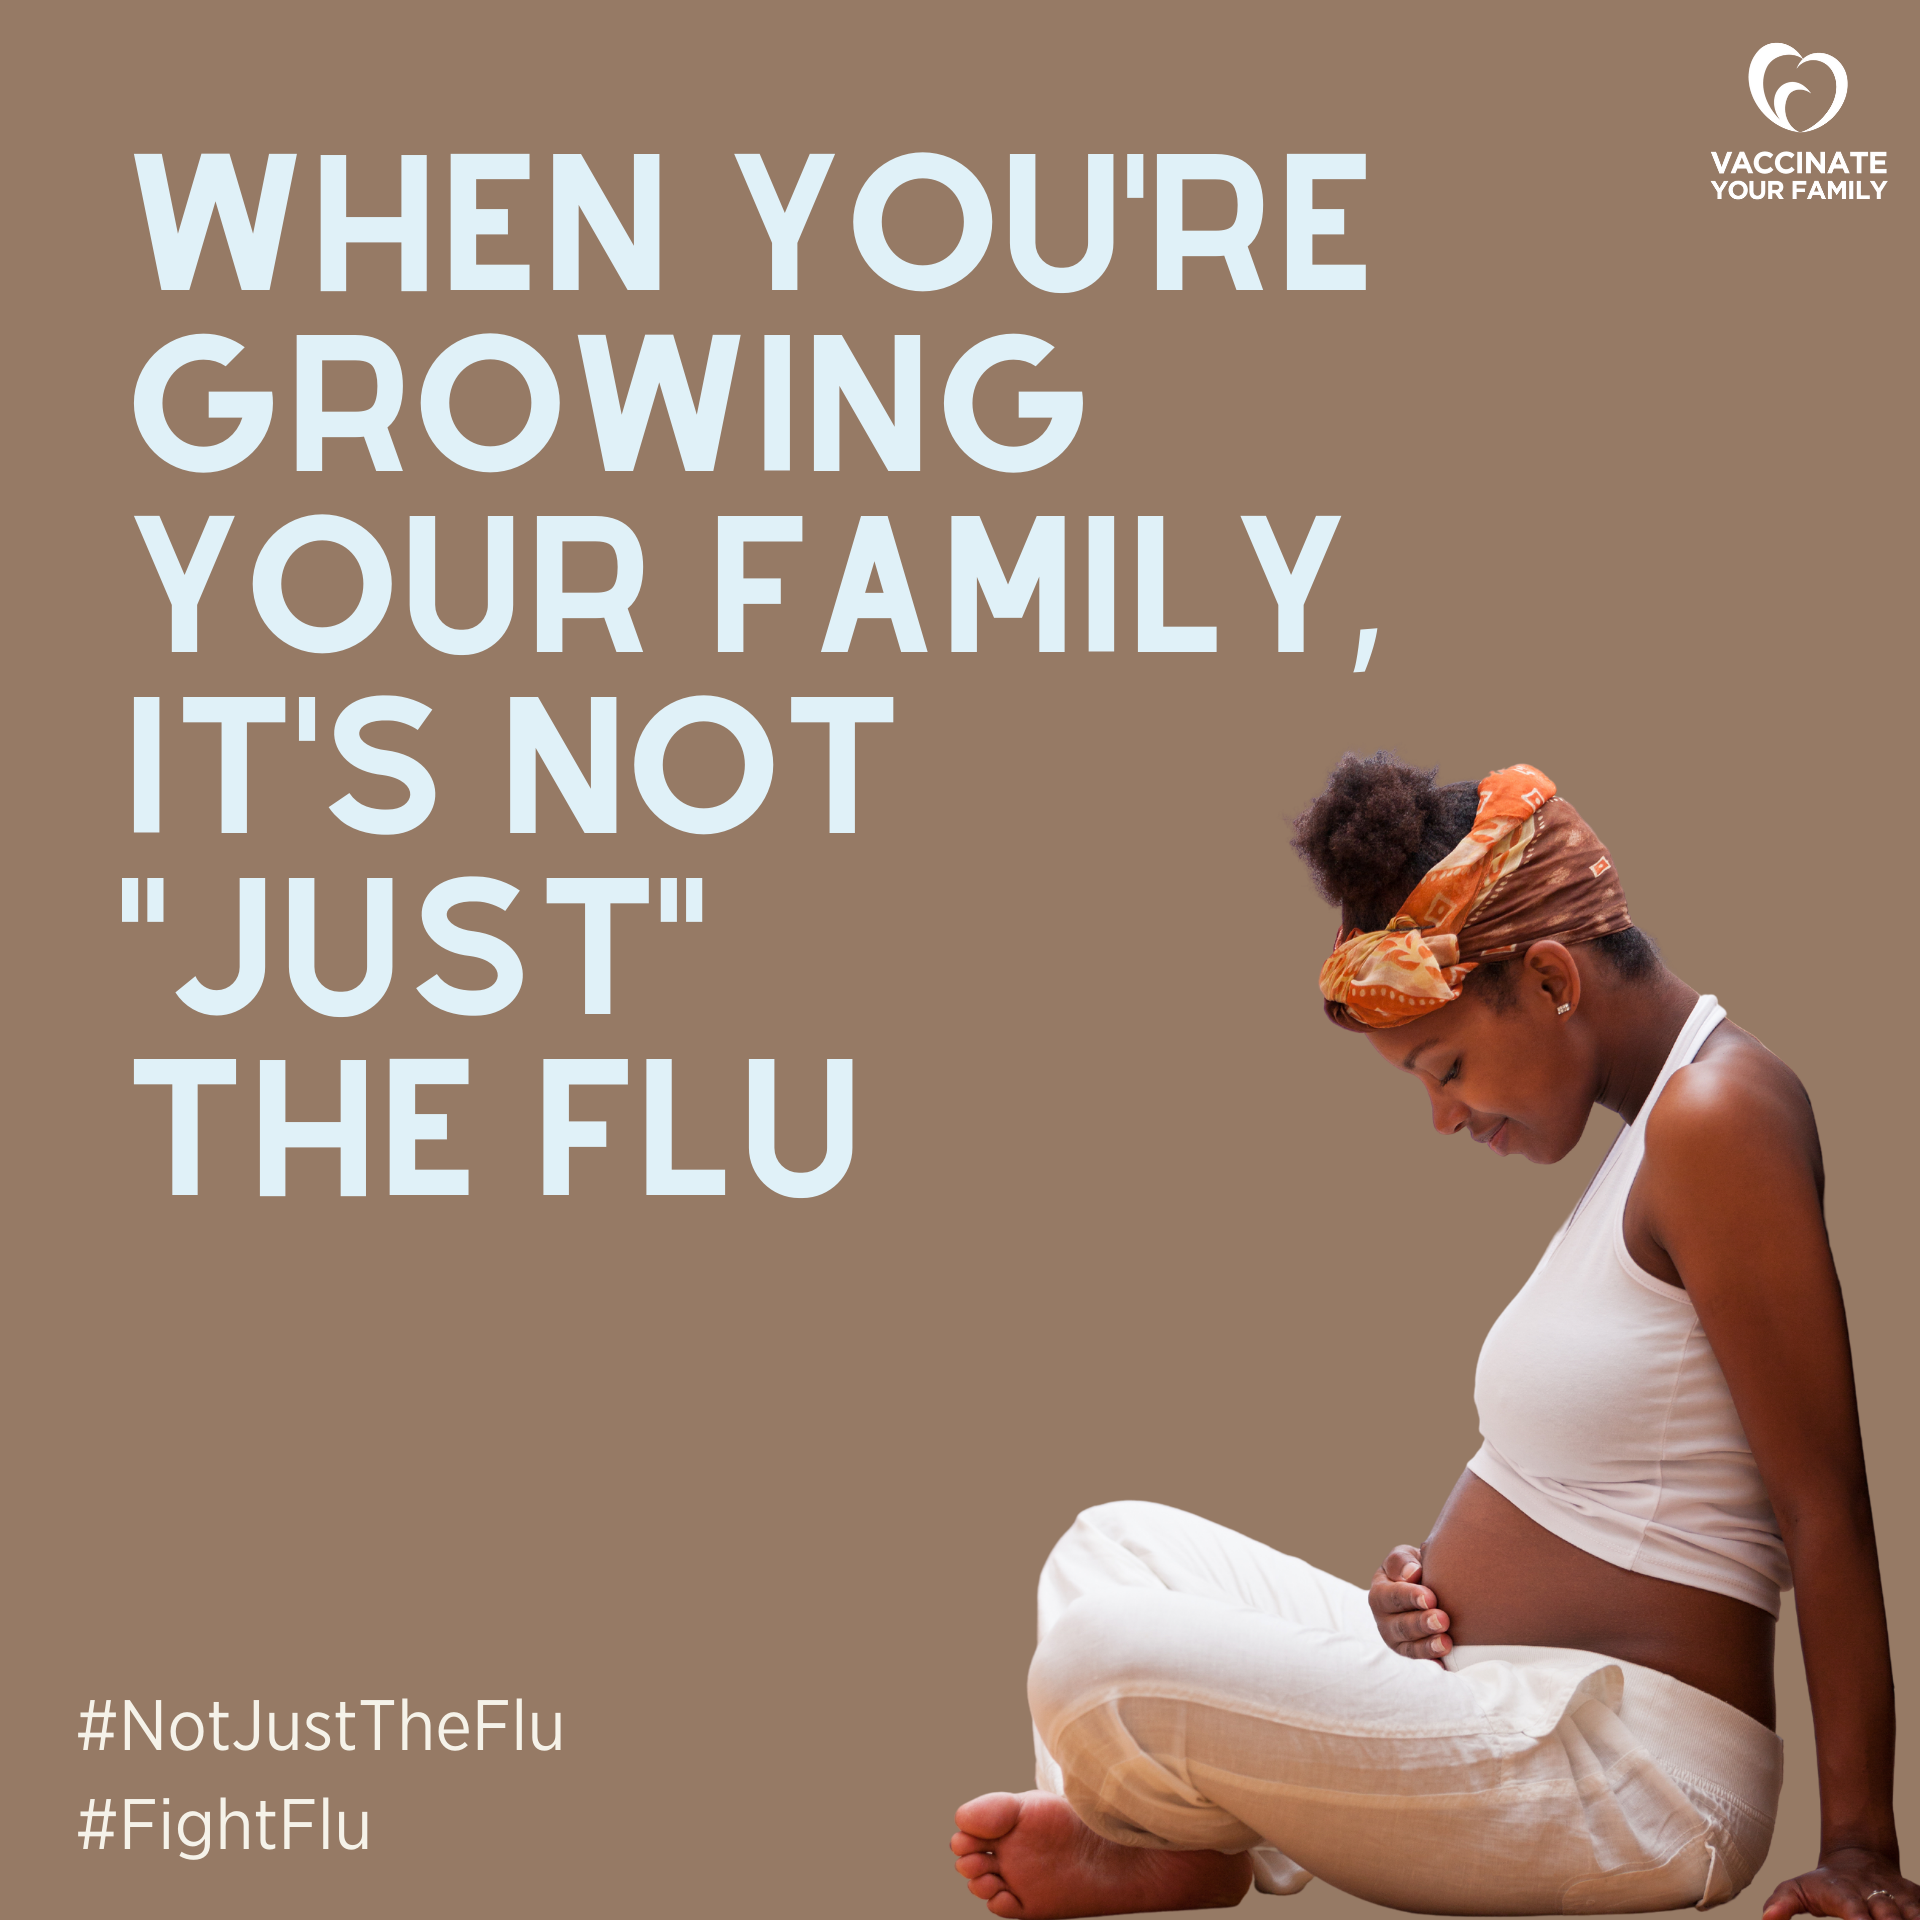 Light brown background with white text and Vaccinate Your Family logo at the top right corner. A Black woman is sitting on the floor with her hand at her stomach and is looking down at her baby bump. Flu campaign hashtags are at the bottom left corner.